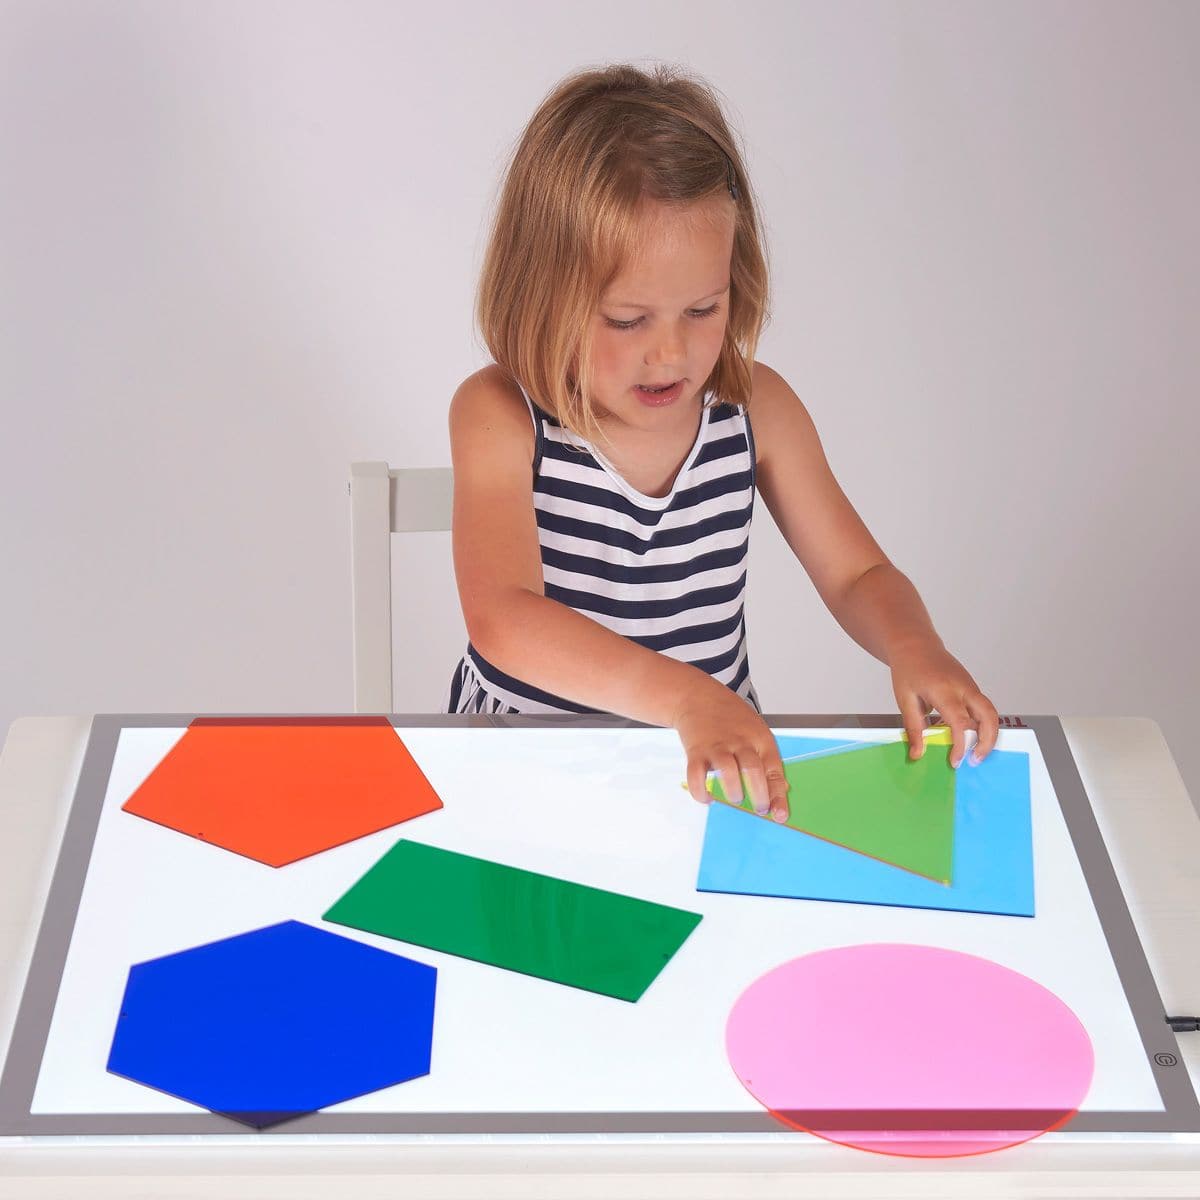 Jumbo Colour Mixing Shapes, The Jumbo Colour Mixing Shapes set contains 6 giant pieces of acrylic in different colours and with different shapes (red, blue, yellow, green, purple and orange – square, rectangle, circle, triangle, pentagon and hexagon). The Jumbo Colour Mixing Shapes are ideal for shape and colour recognition and for colour mixing, using as templates, and to support mathematical development. The Jumbo Colour Mixing Shapes are great for fascination play when used on a light box creating a stun